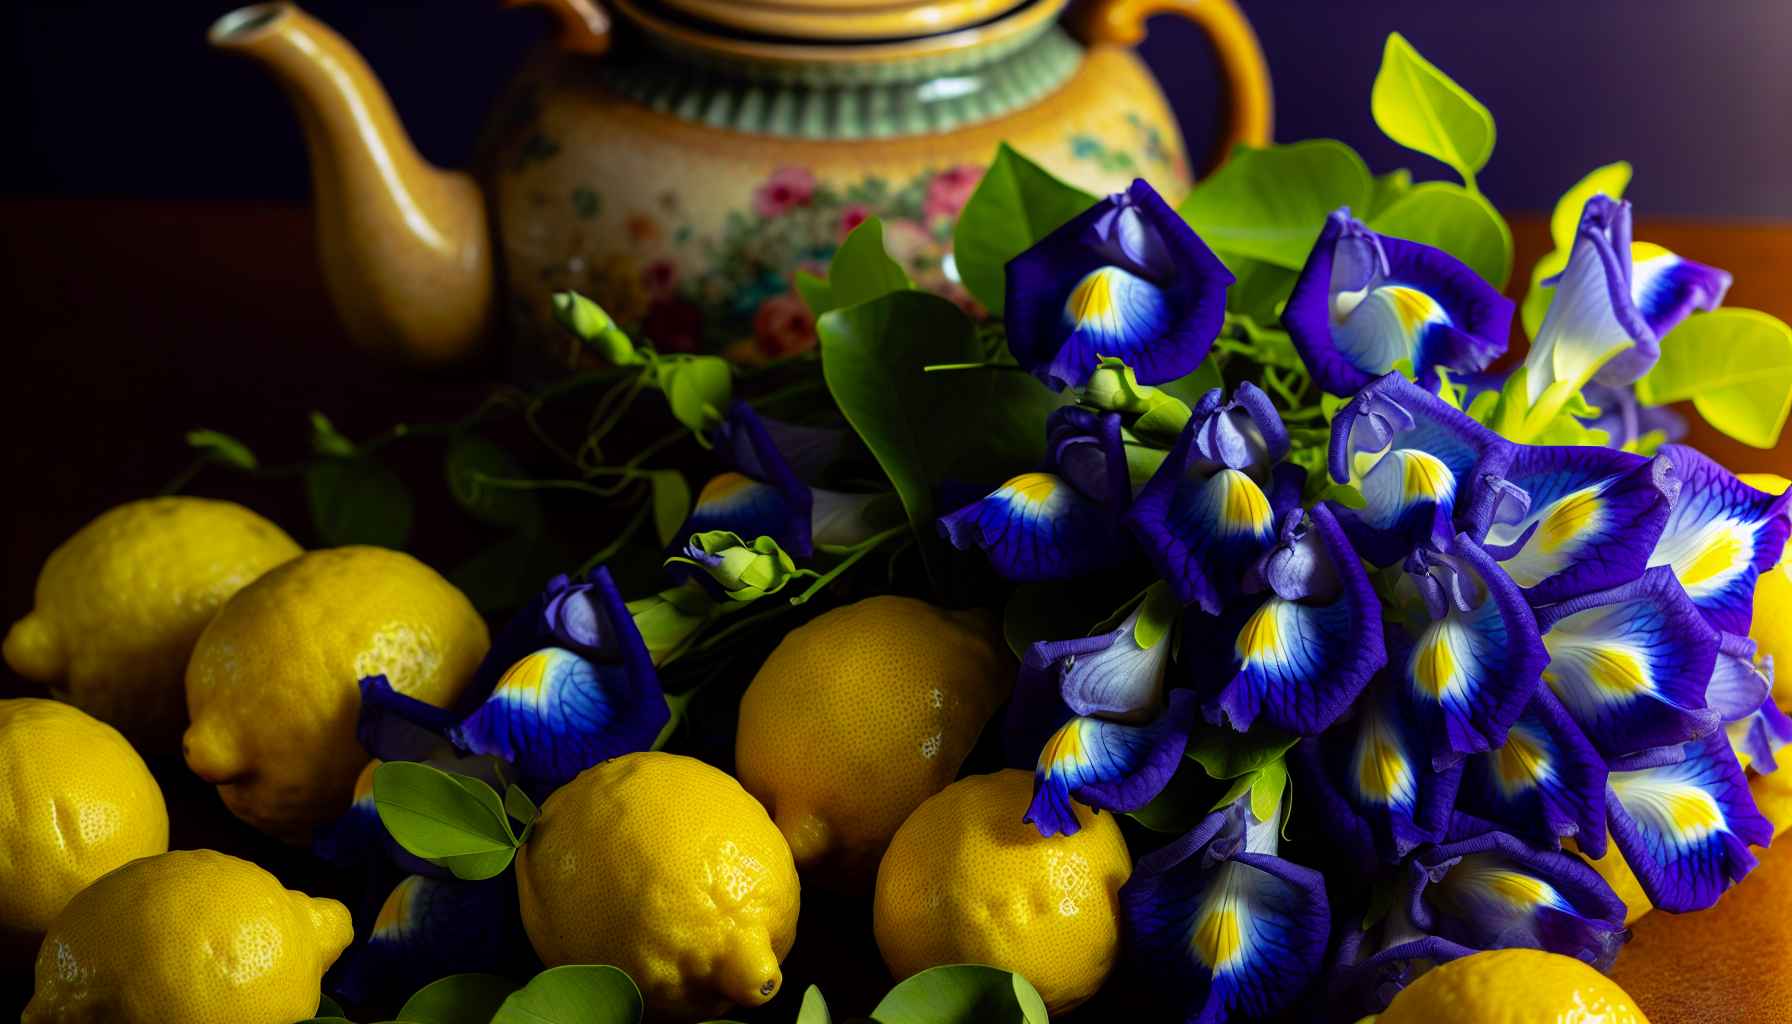 Assortment of fresh butterfly pea flowers, lemons, and a teapot